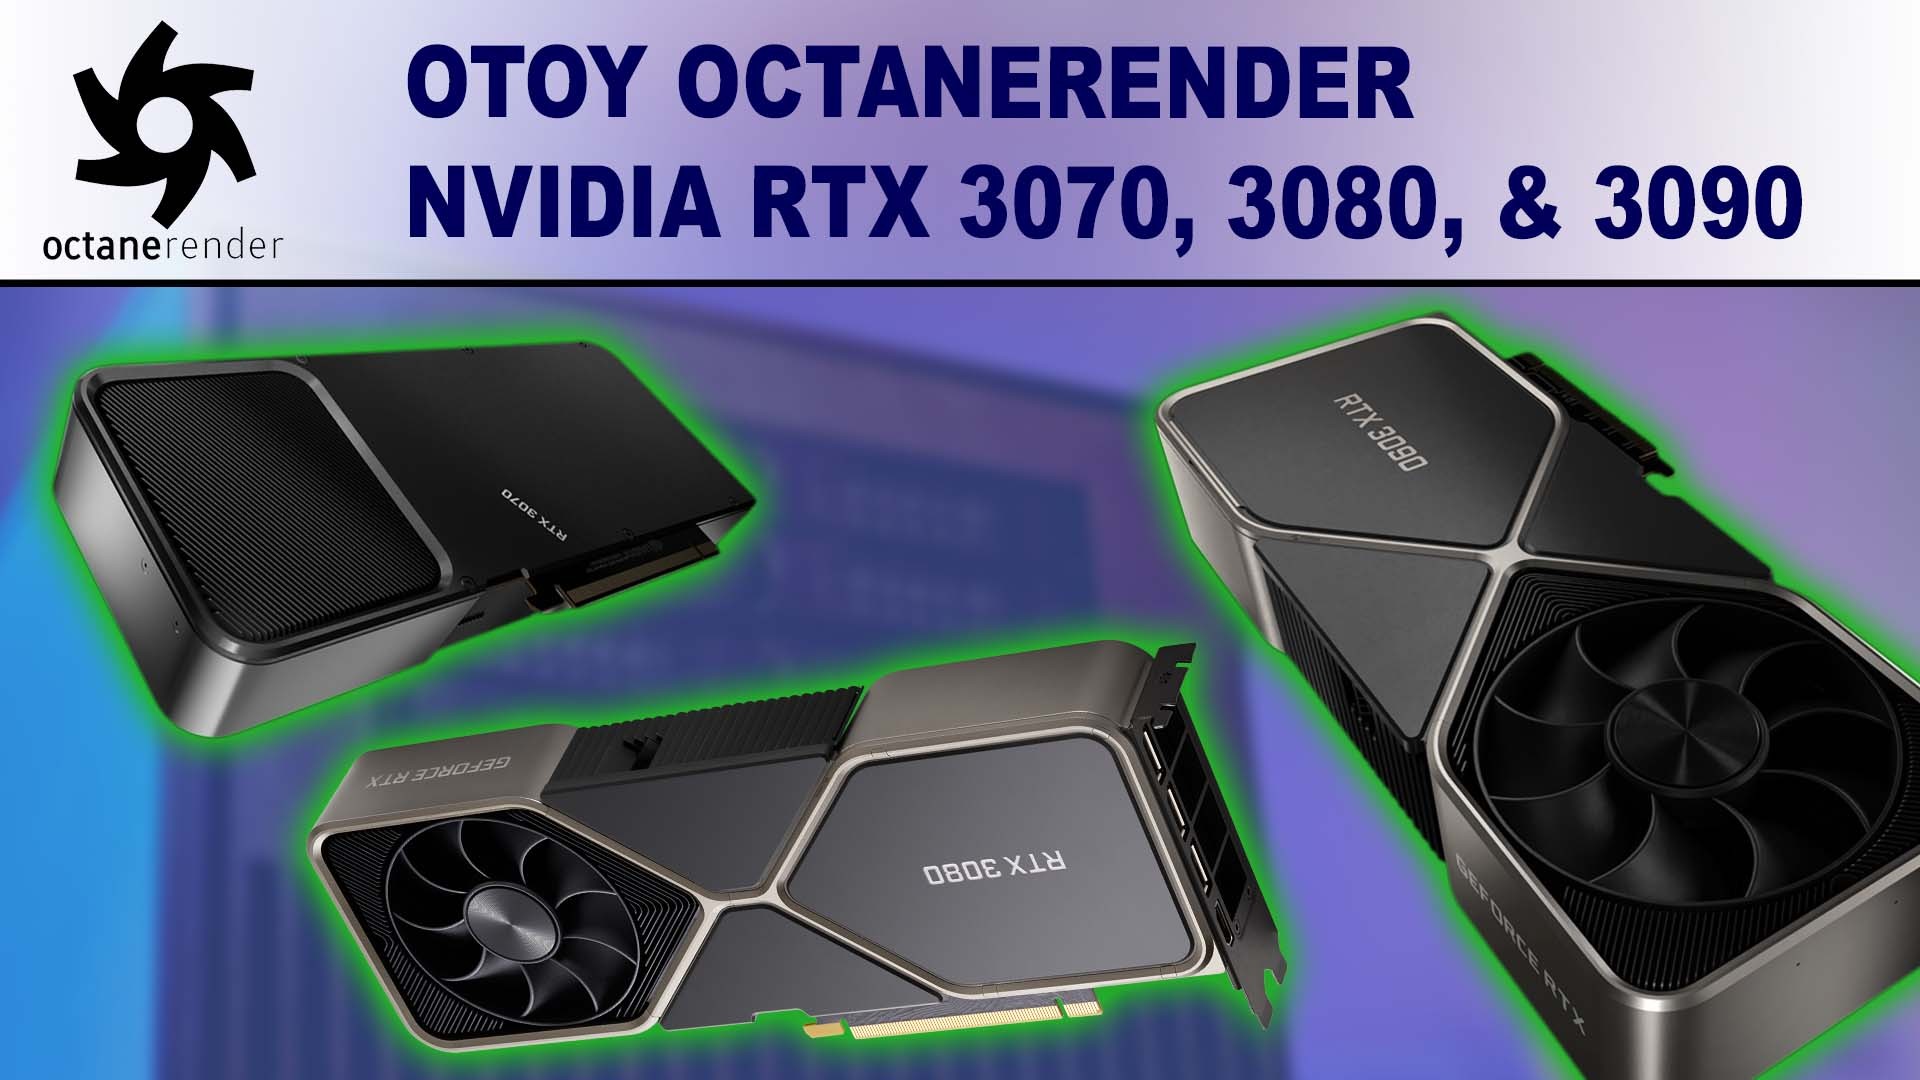 OctaneRender Performance Review for NVIDIA GeForce RTX 3070 8GB, 3080 10GB & 3090 24GB